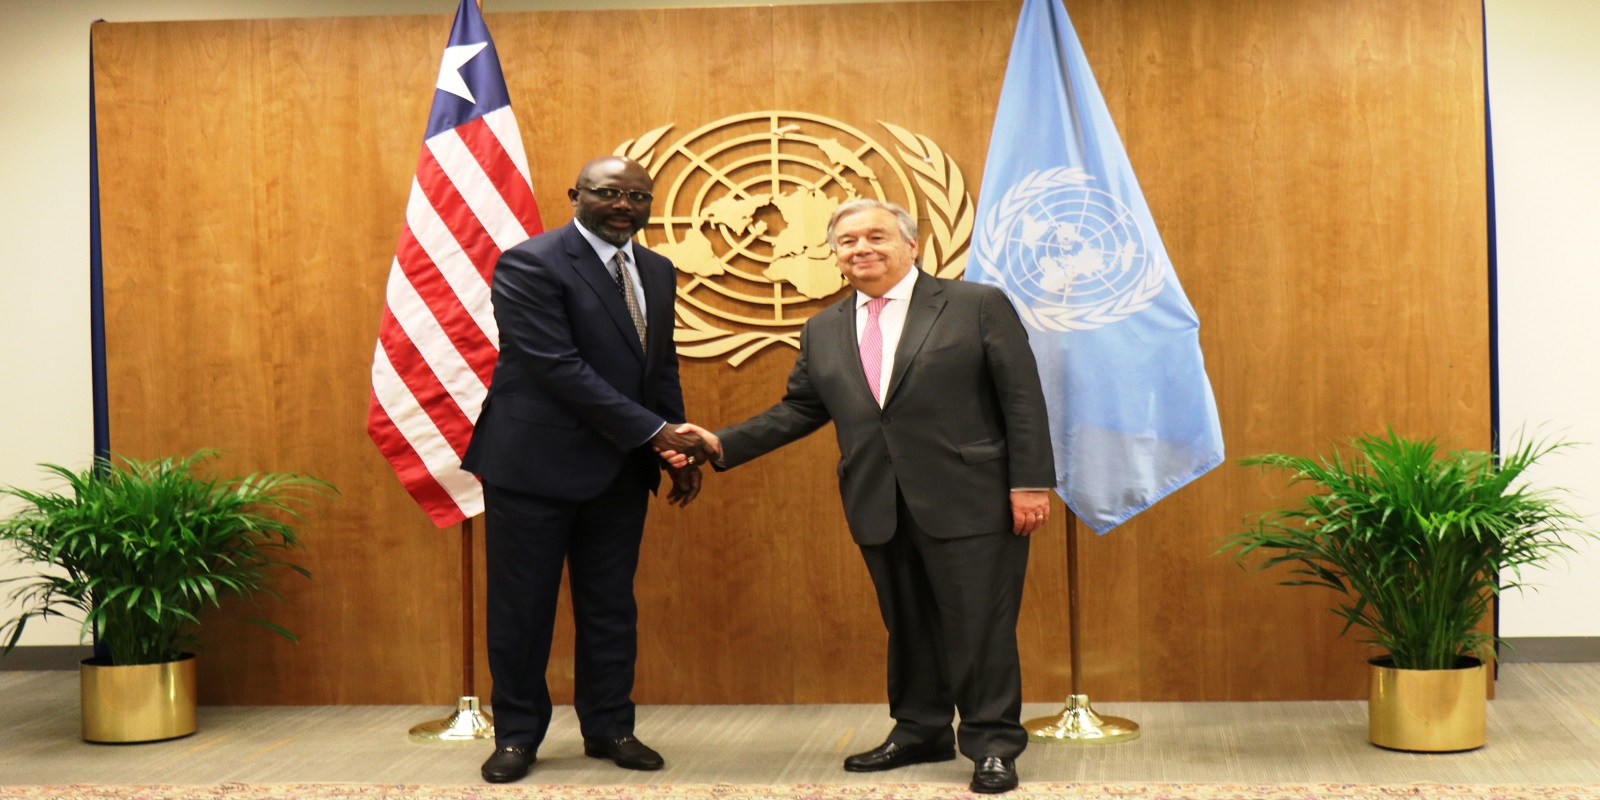 H.E. President Weah and UN Secretary-General Guterres commit to sustenance of peace in Liberia